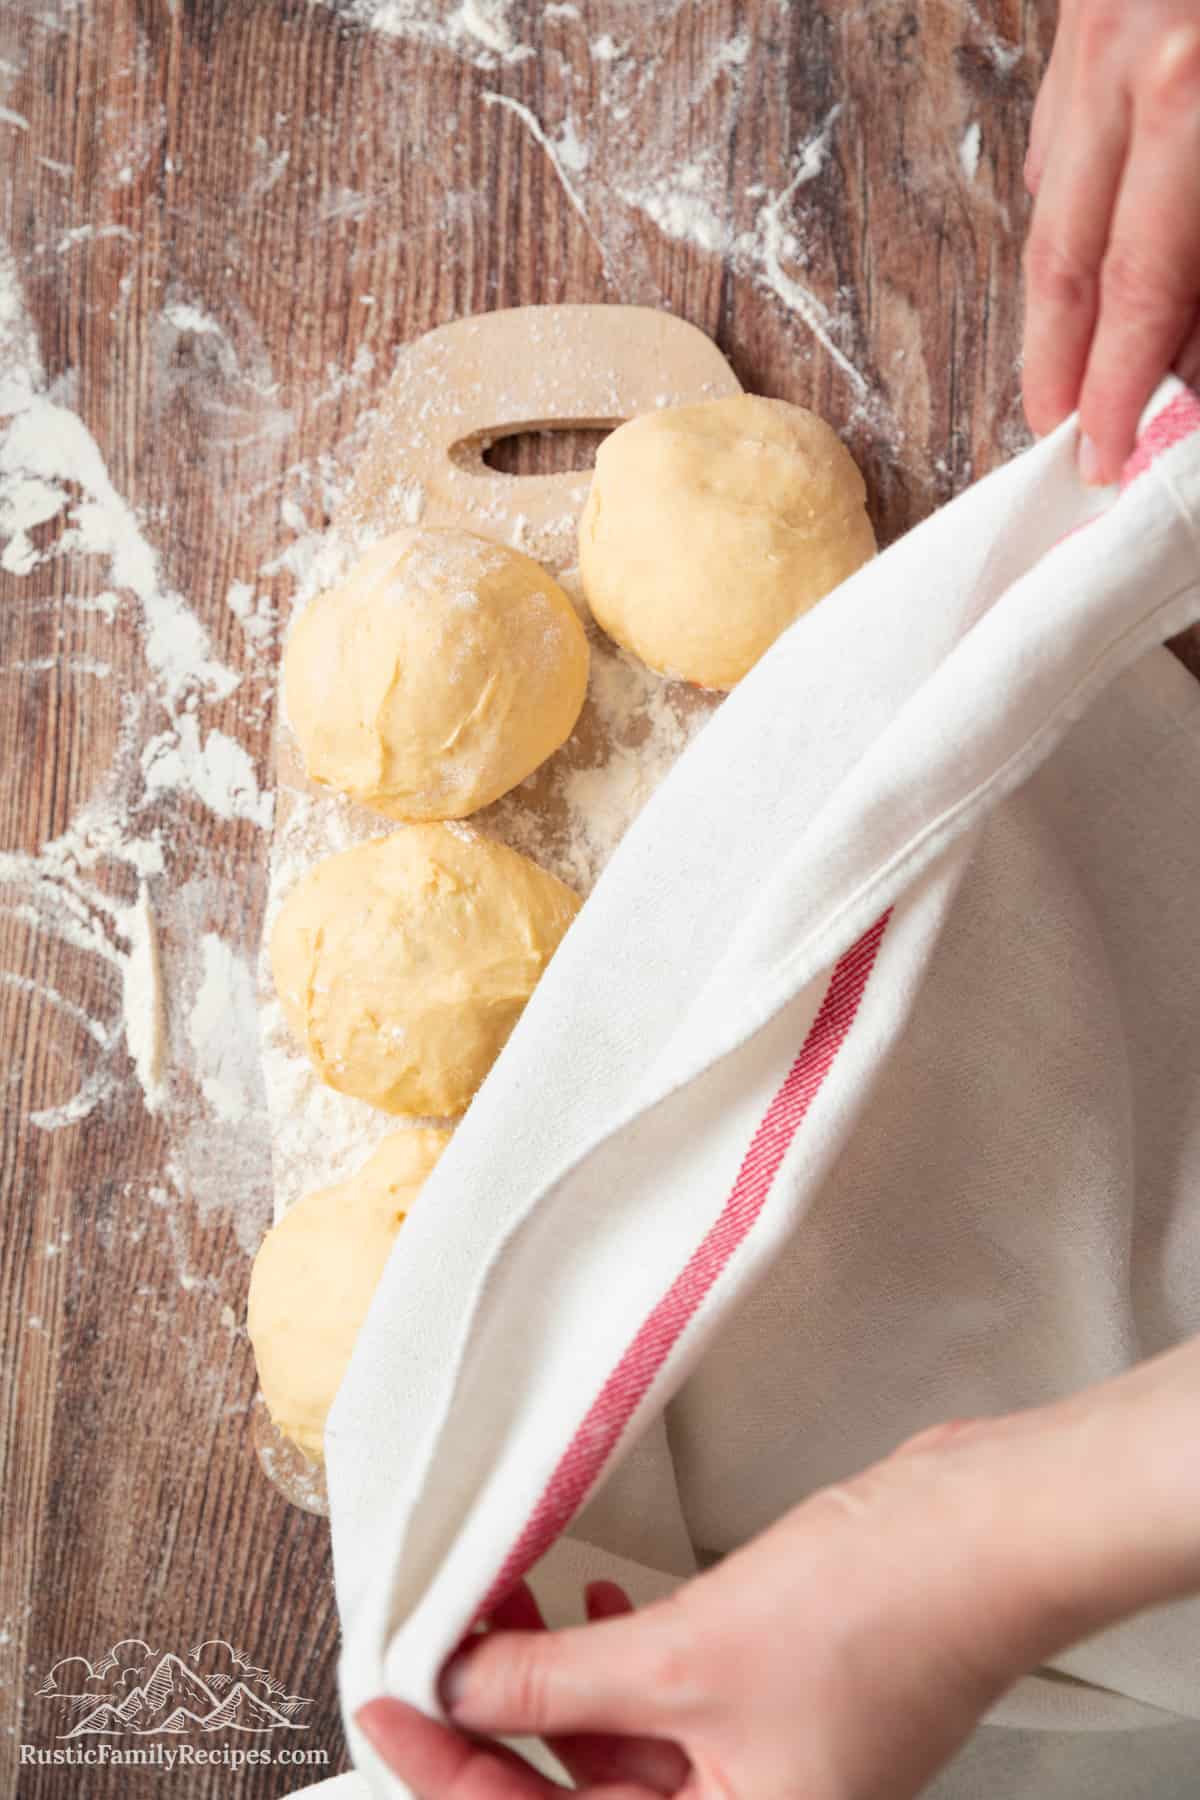 A towel being placed over paczki to rise